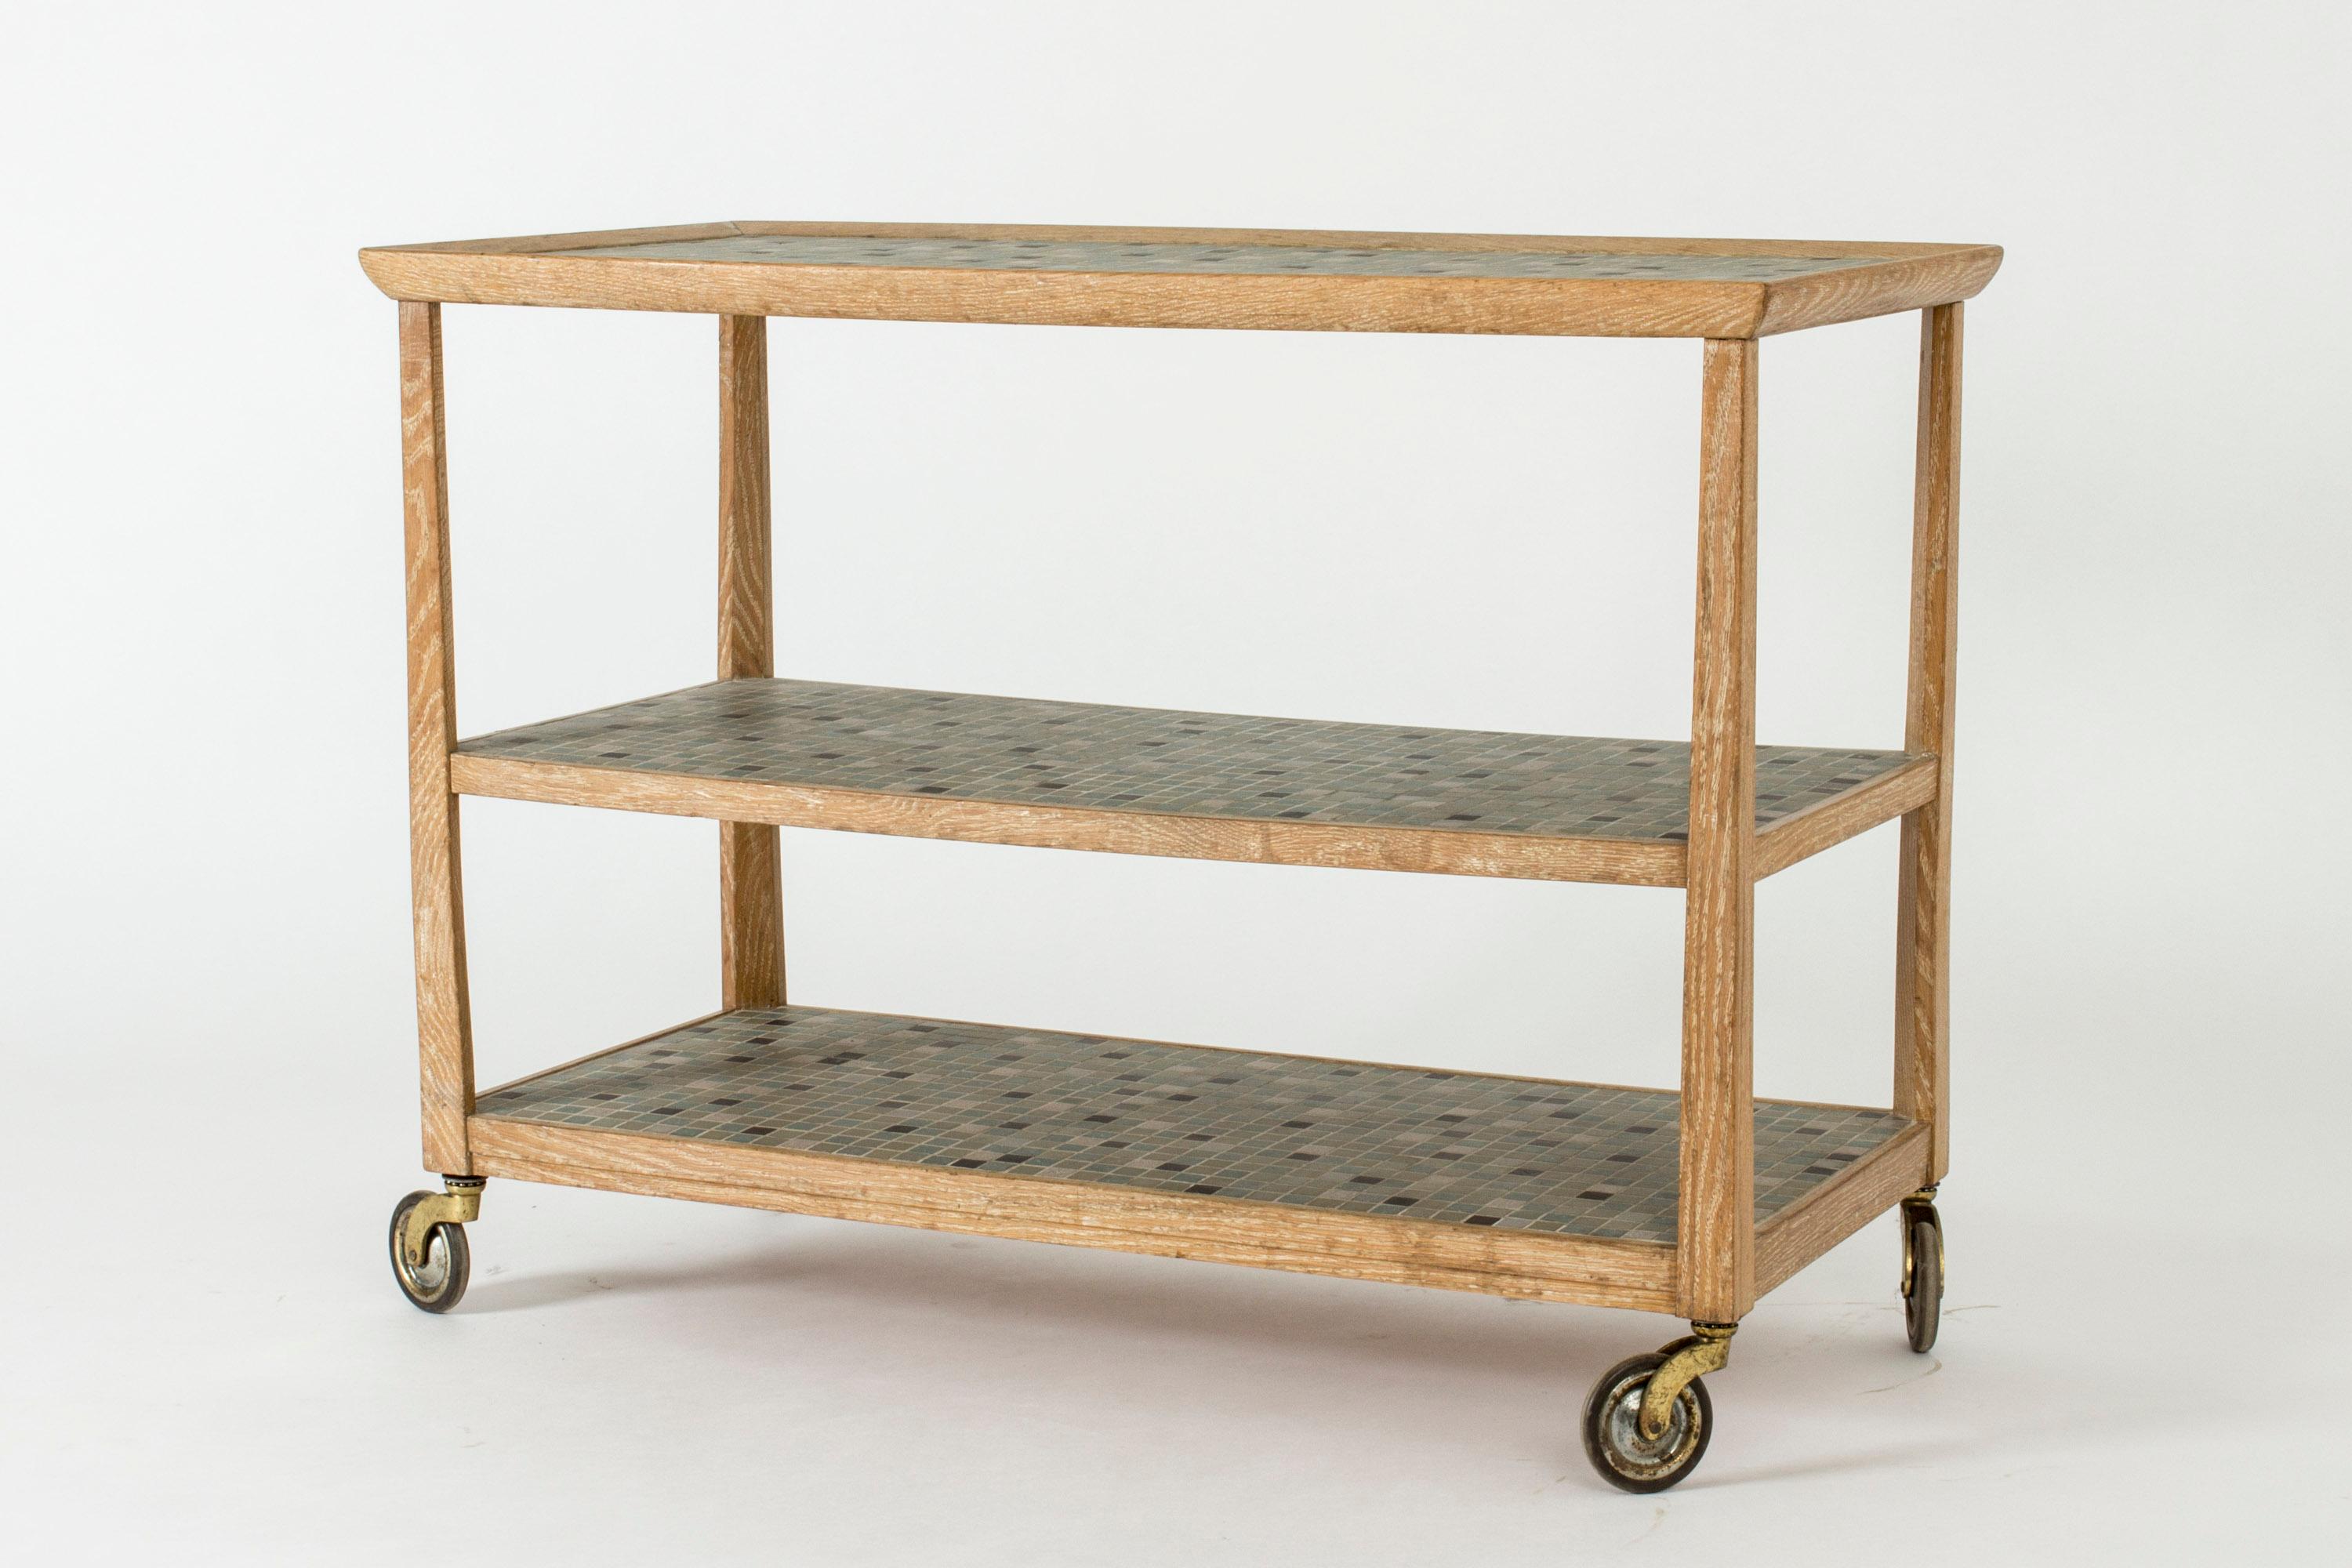 Beautiful bar trolley by Otto Schulz made from white-washed oak that brings out the wood grain in a great way. Shelves decorated with ceramic tiles in subdued greens and black. Wheels in great condition.